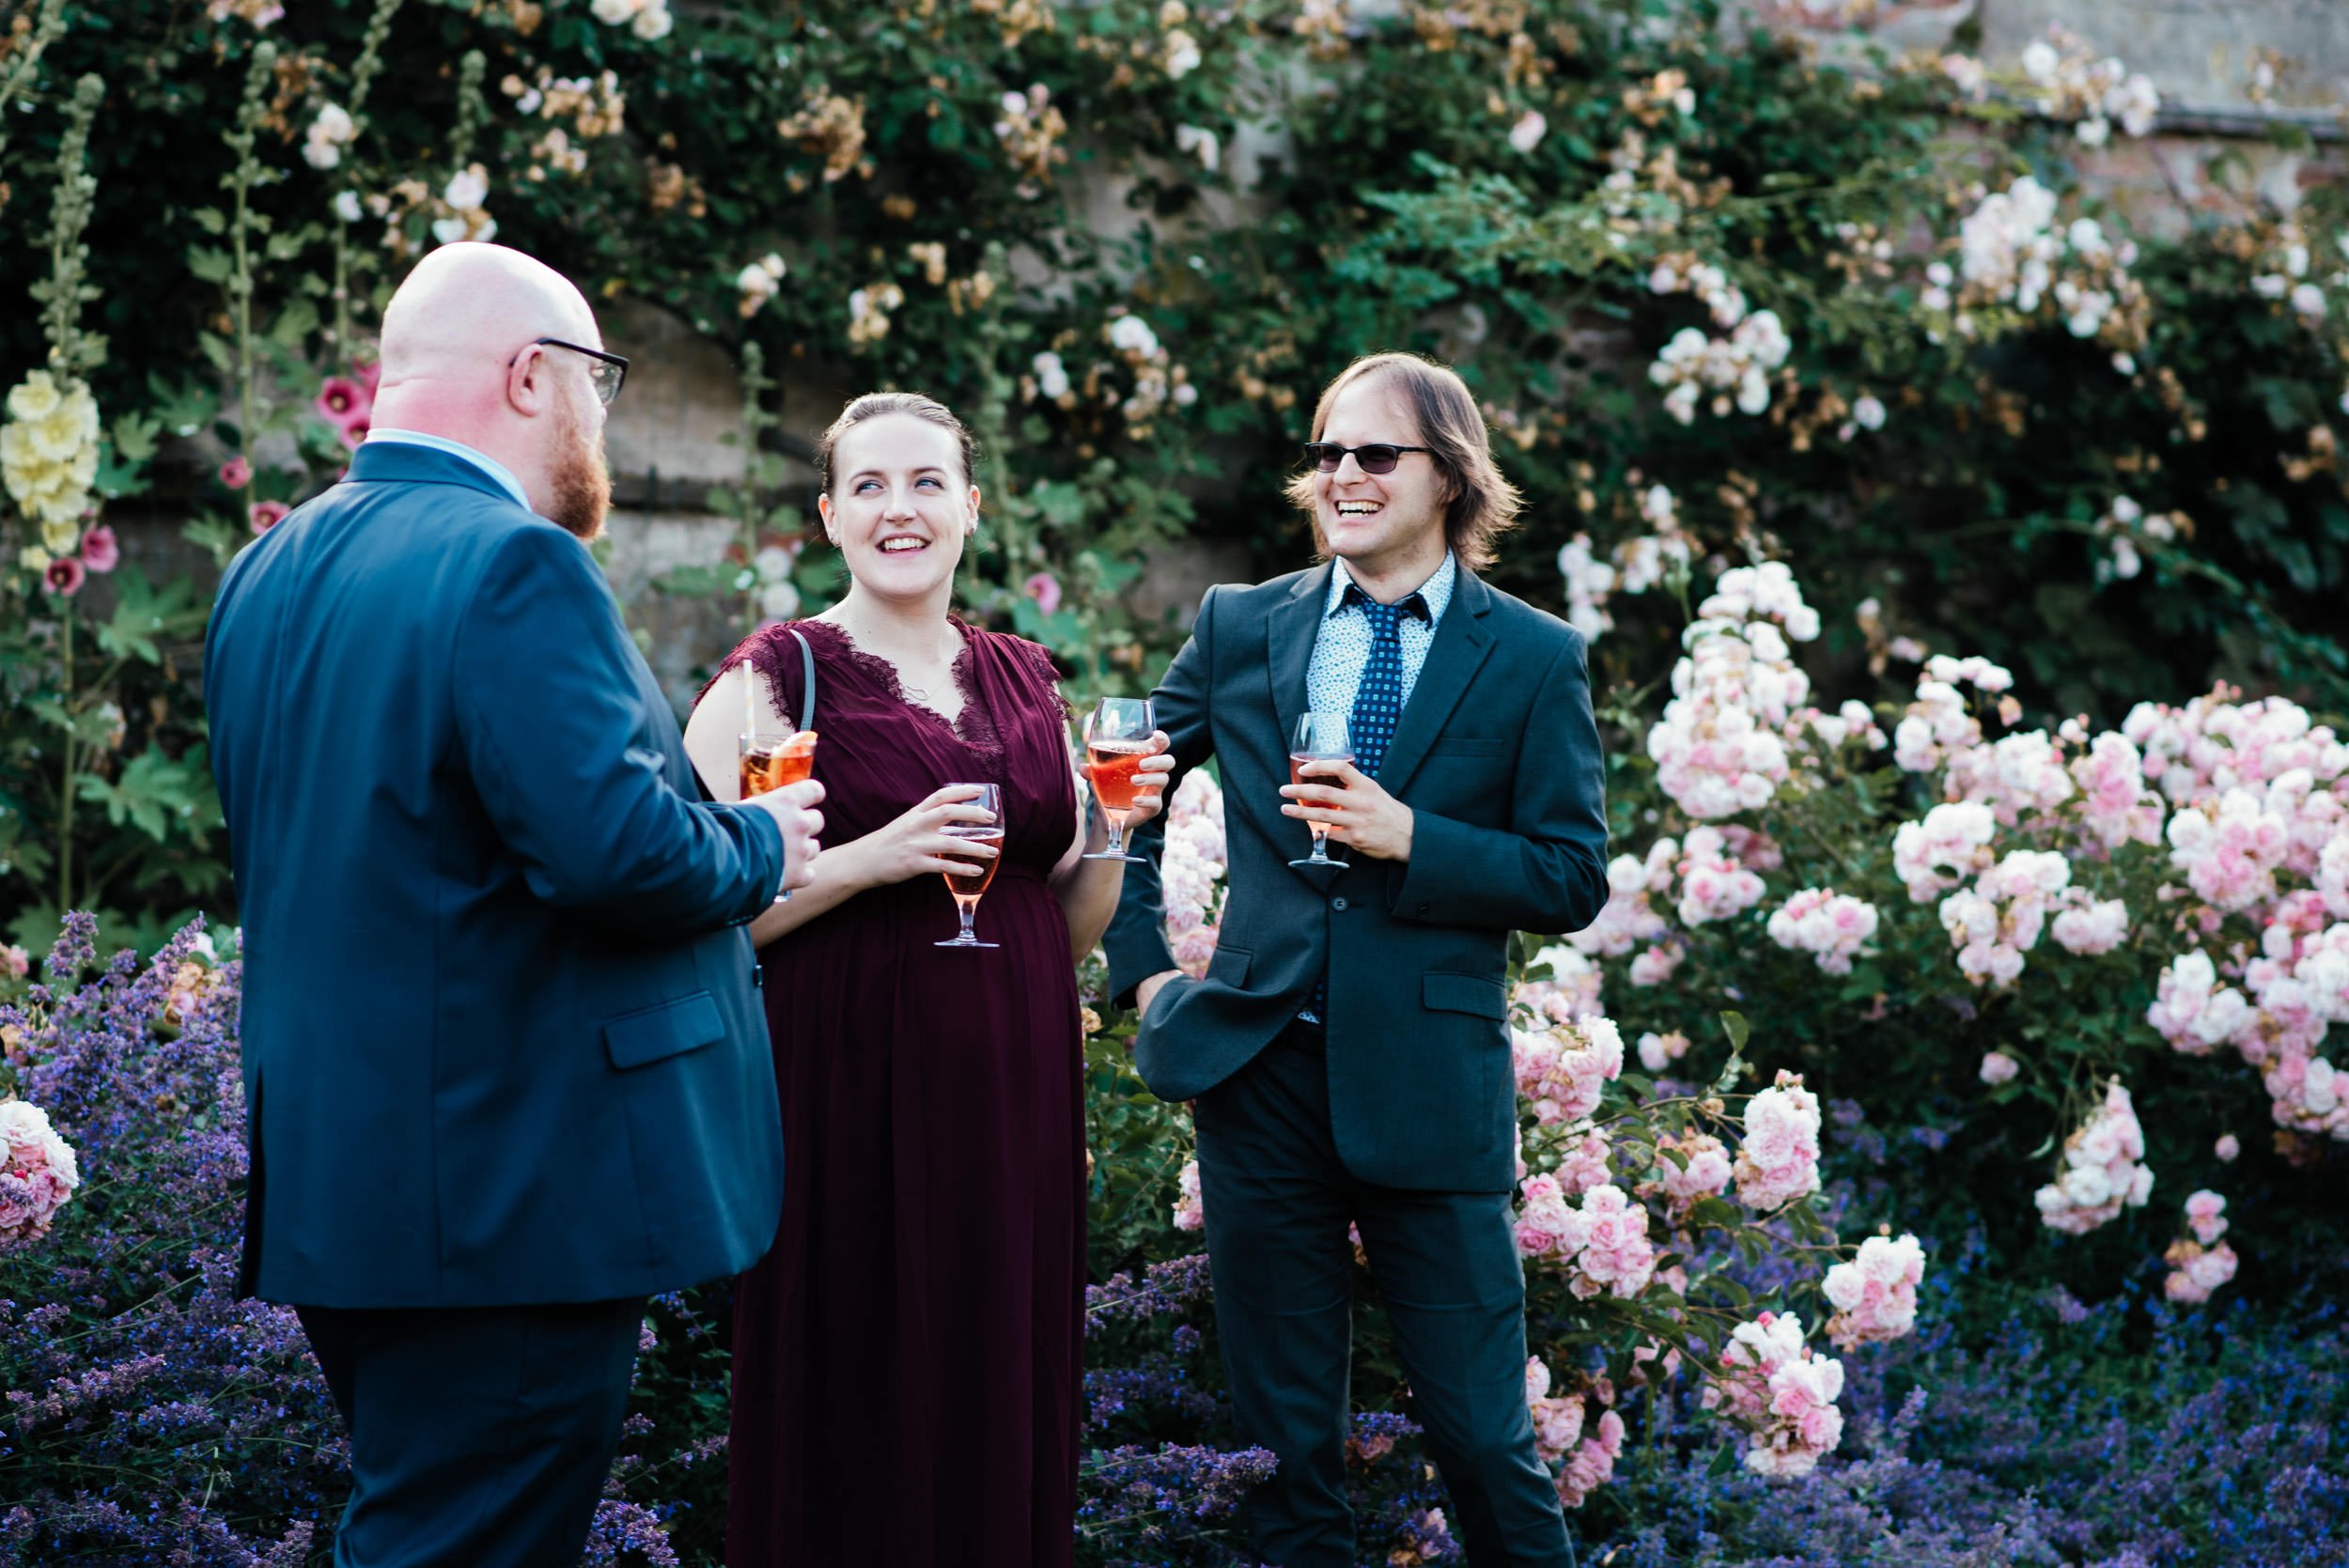 guests share a joke at the reception venue